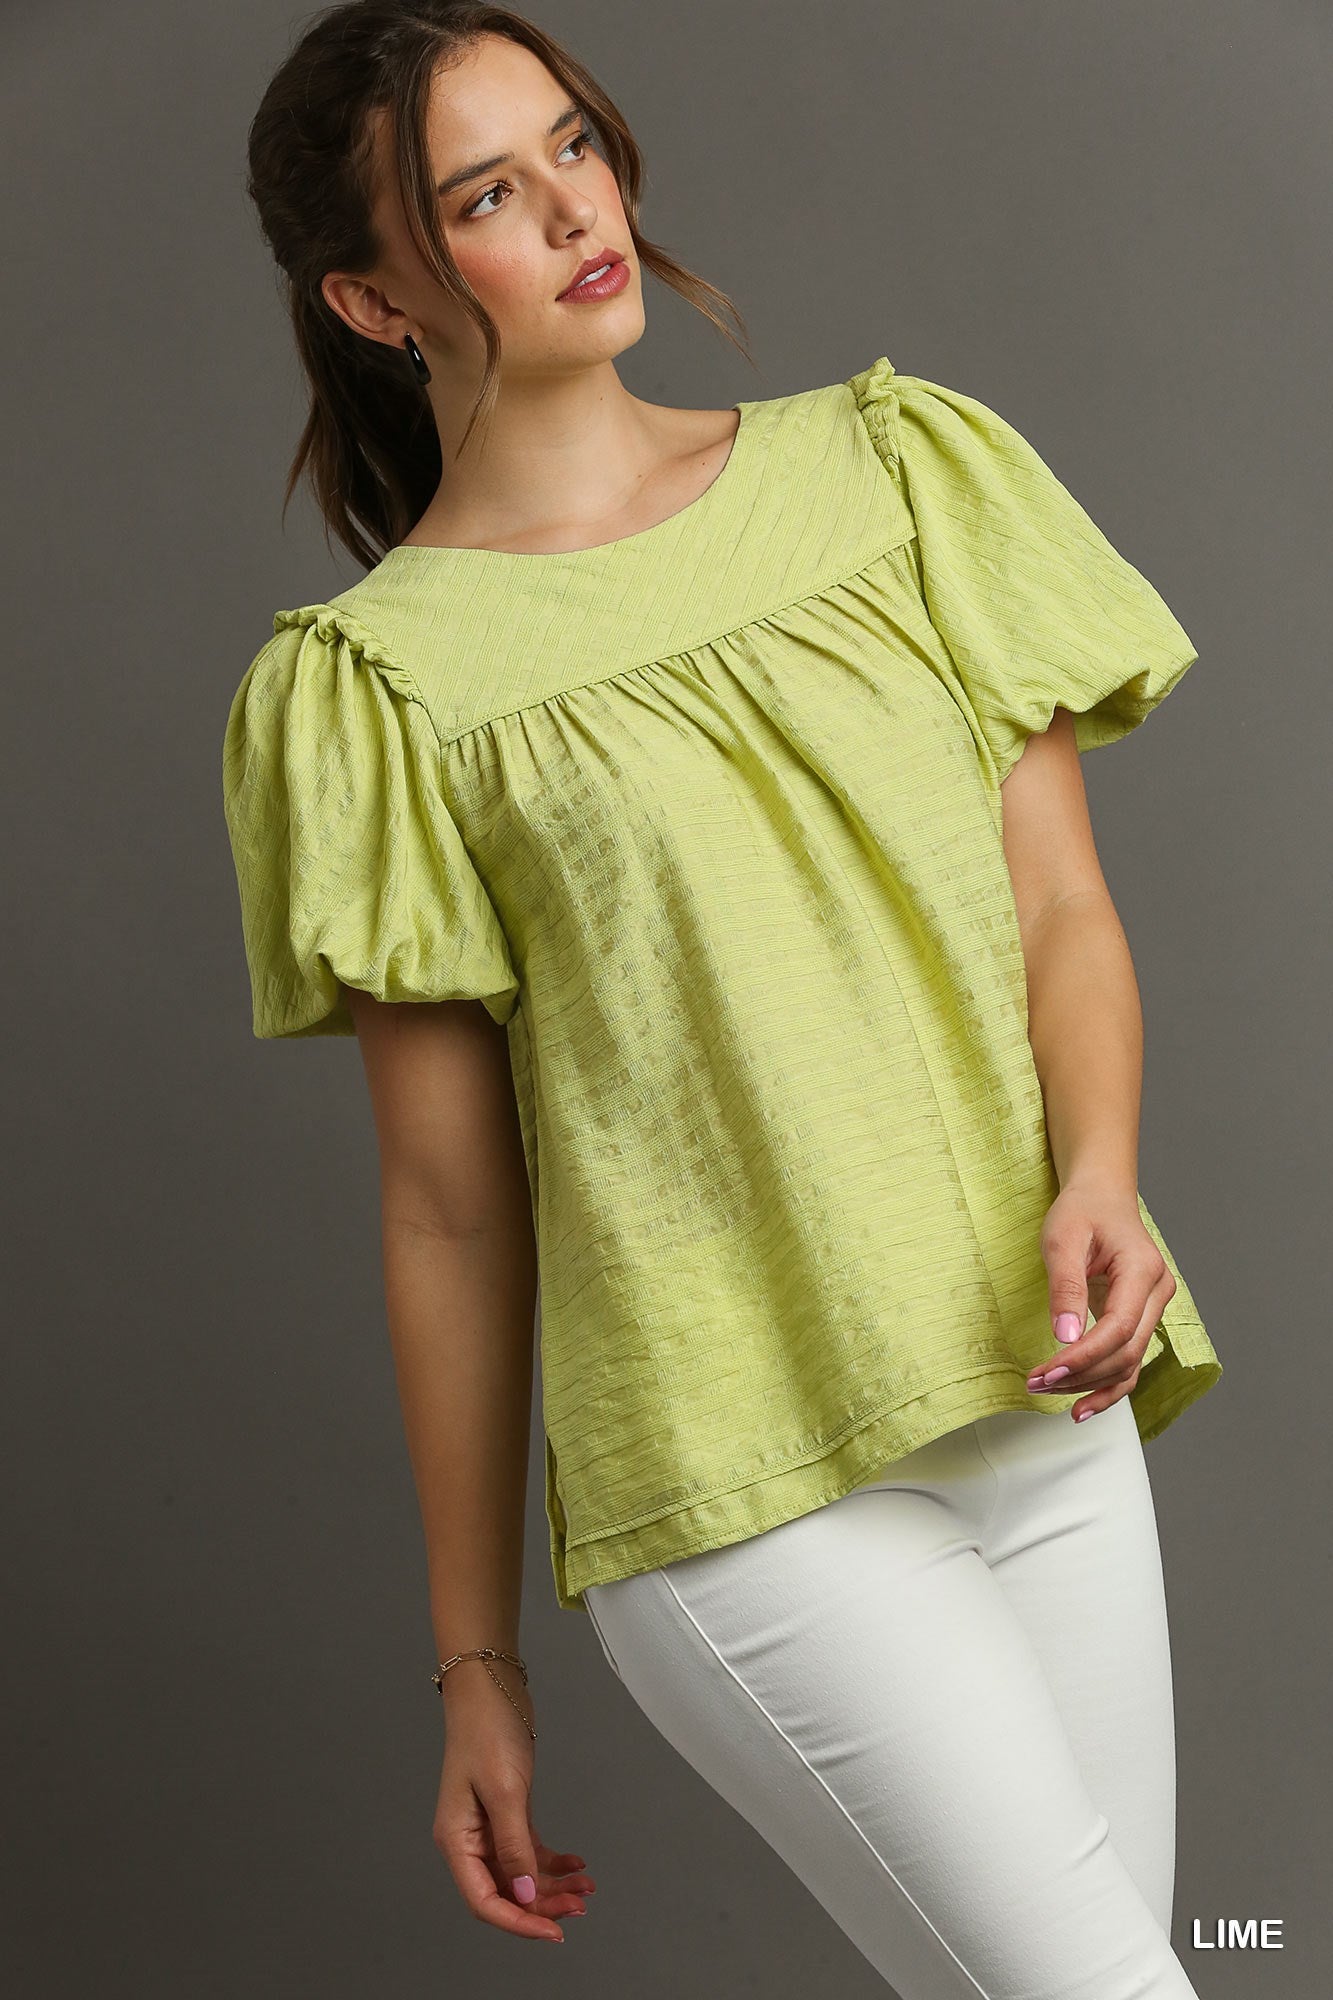 The Woven Coral Top